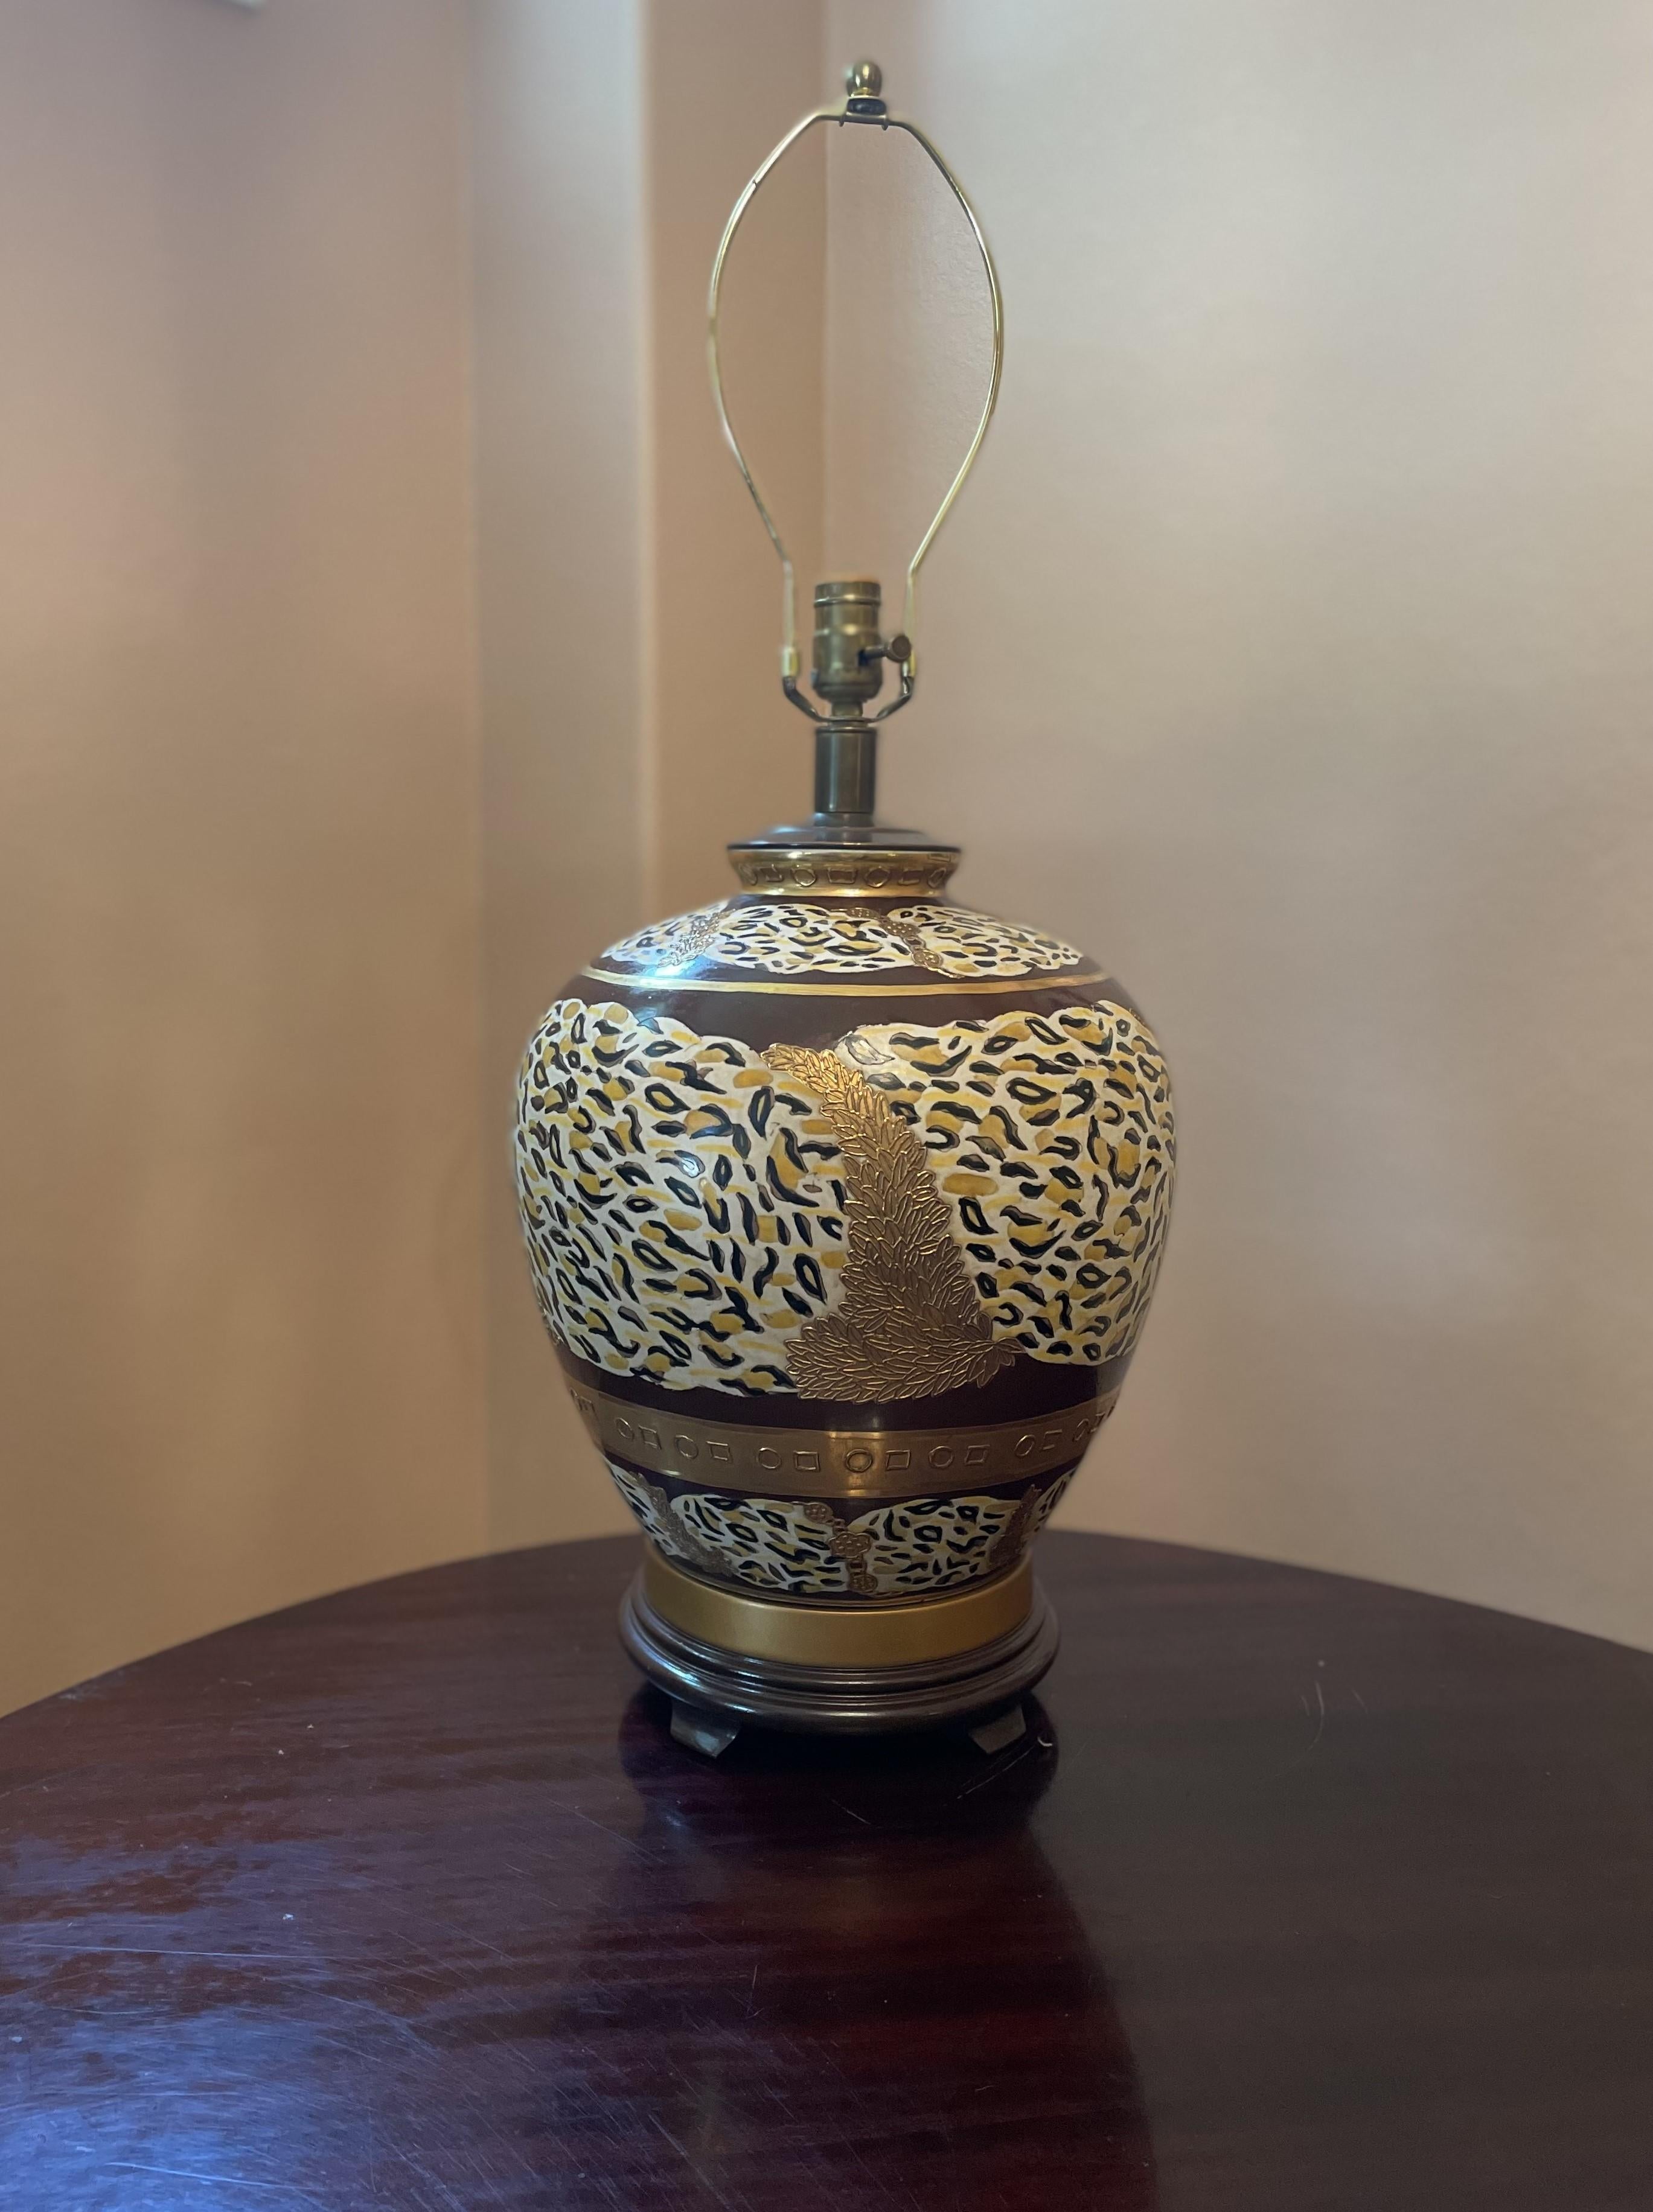 This large hand-painted ceramic table lamp gives off a great vibe with its animal motif that will channel your inner safari wishes. It's a one-of-a-kind piece. The neutral palette of browns, tans, blacks, and creams, highlighted with brass,